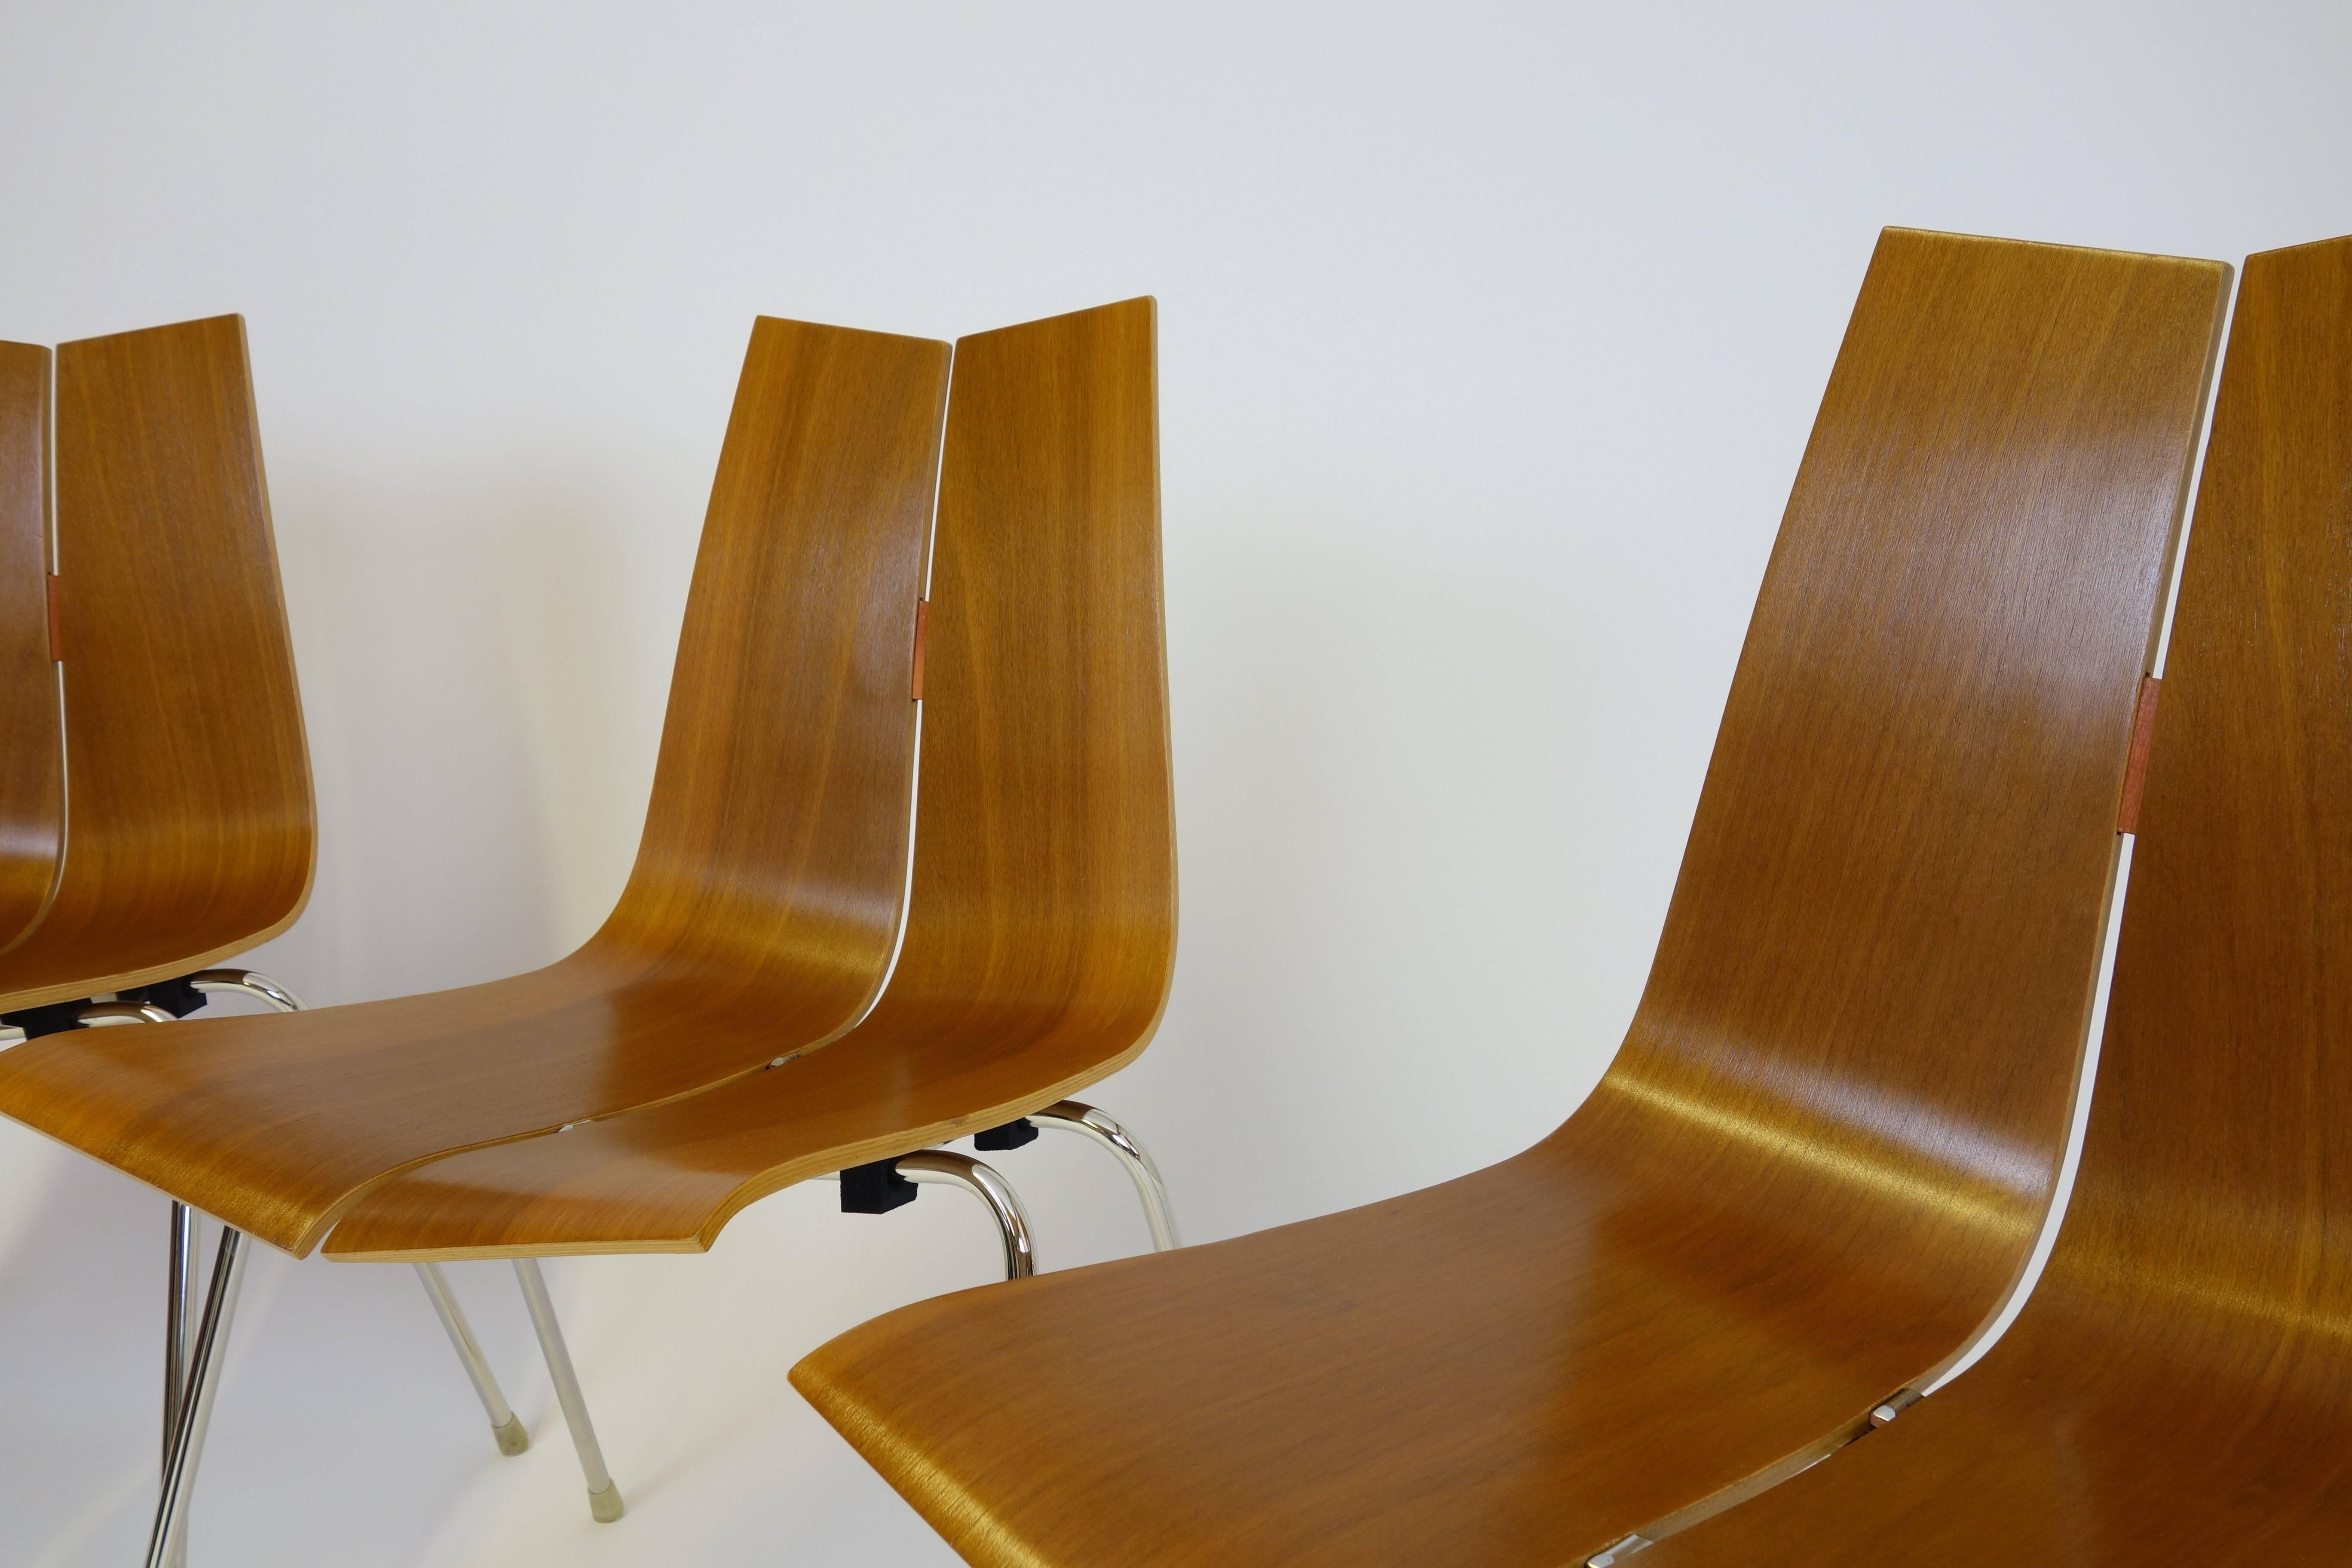 Four GA stacking chairs designed by Hans Bellmann for Horgen-Glarus, Switzerland, 1952.
The seating and backrest are made of moulded plywood finished in veneered teak wood. The nickel-plated steel legs and the veneered seating have been carefully